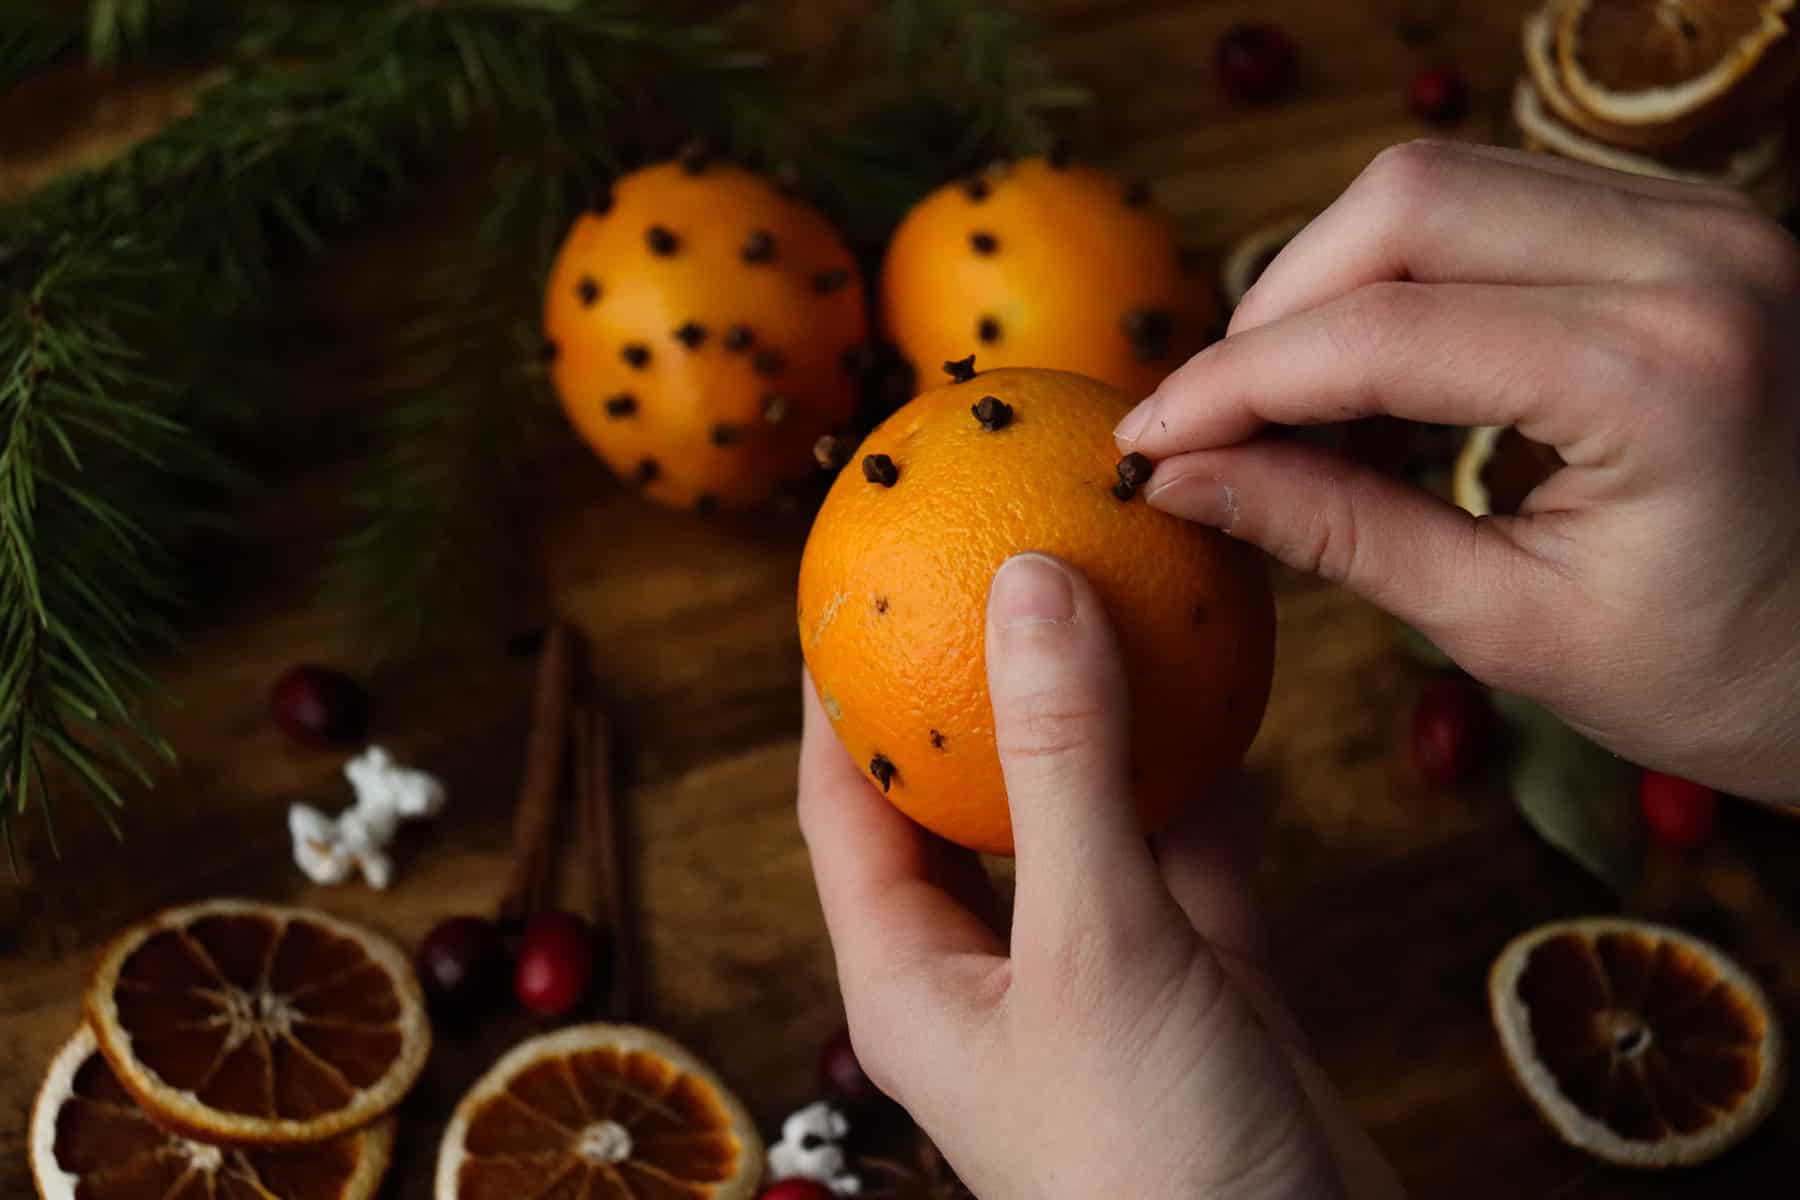 carefully placing cloves into the holes poked into the orange